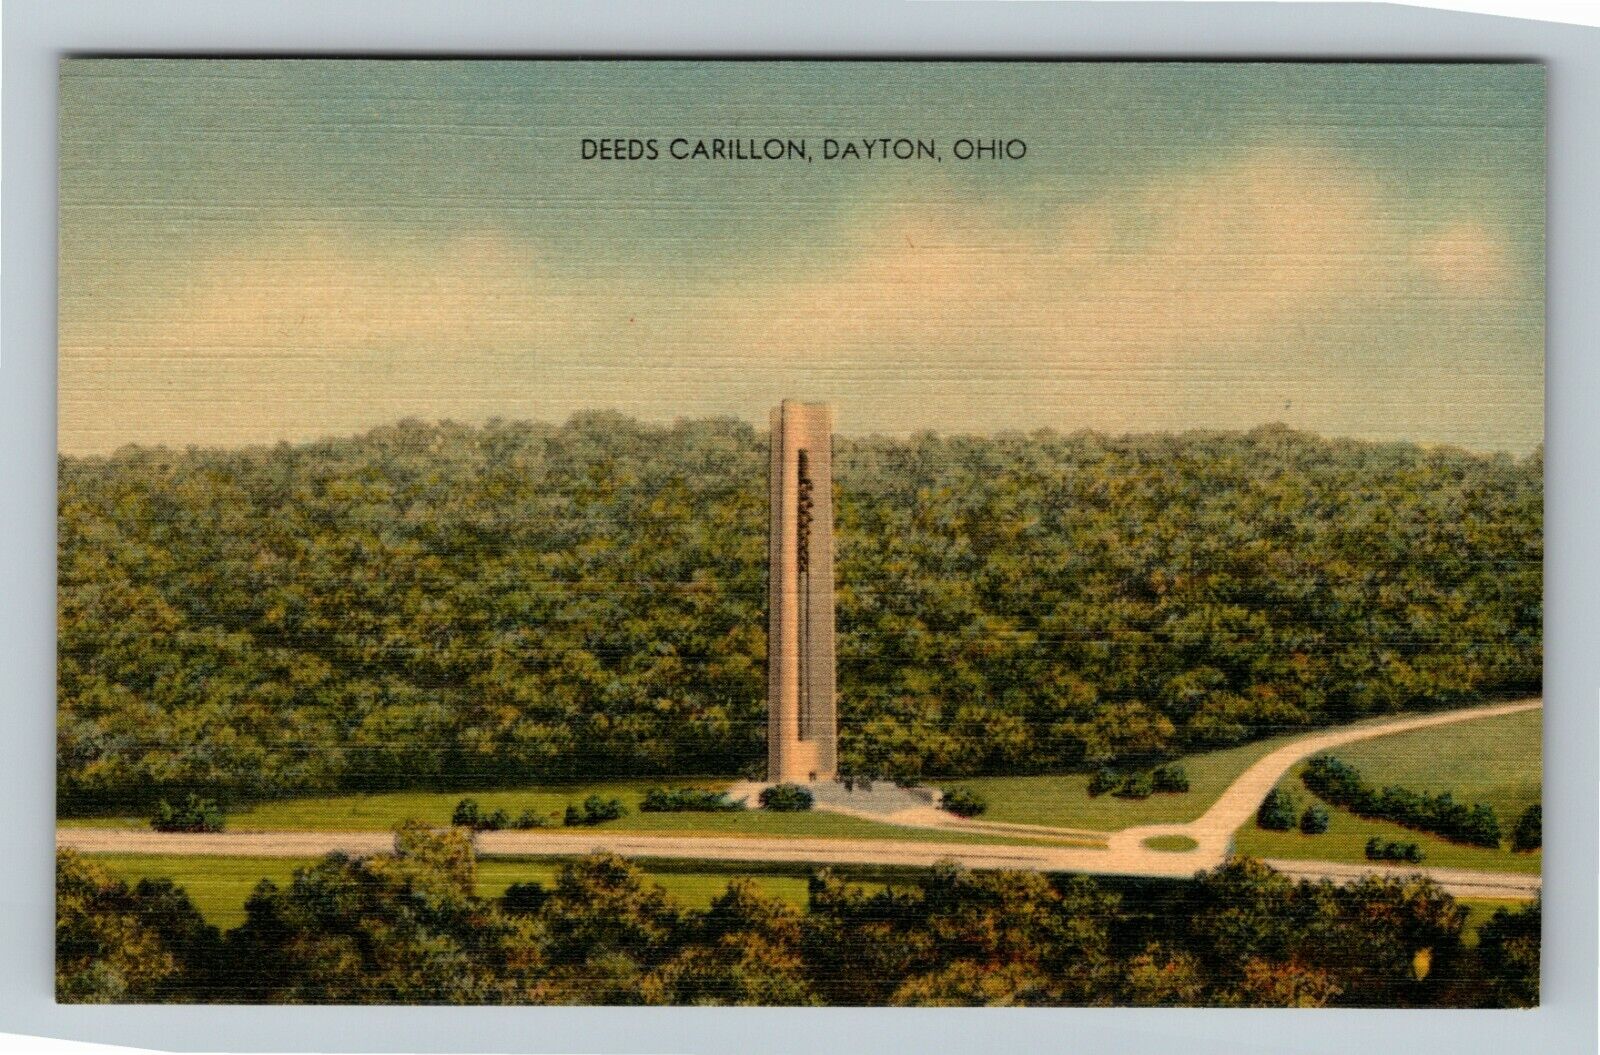 Dayton Ohio DEEDS CARILLON PARK BELL TOWER Aerial Scenic View Vintage Postcard